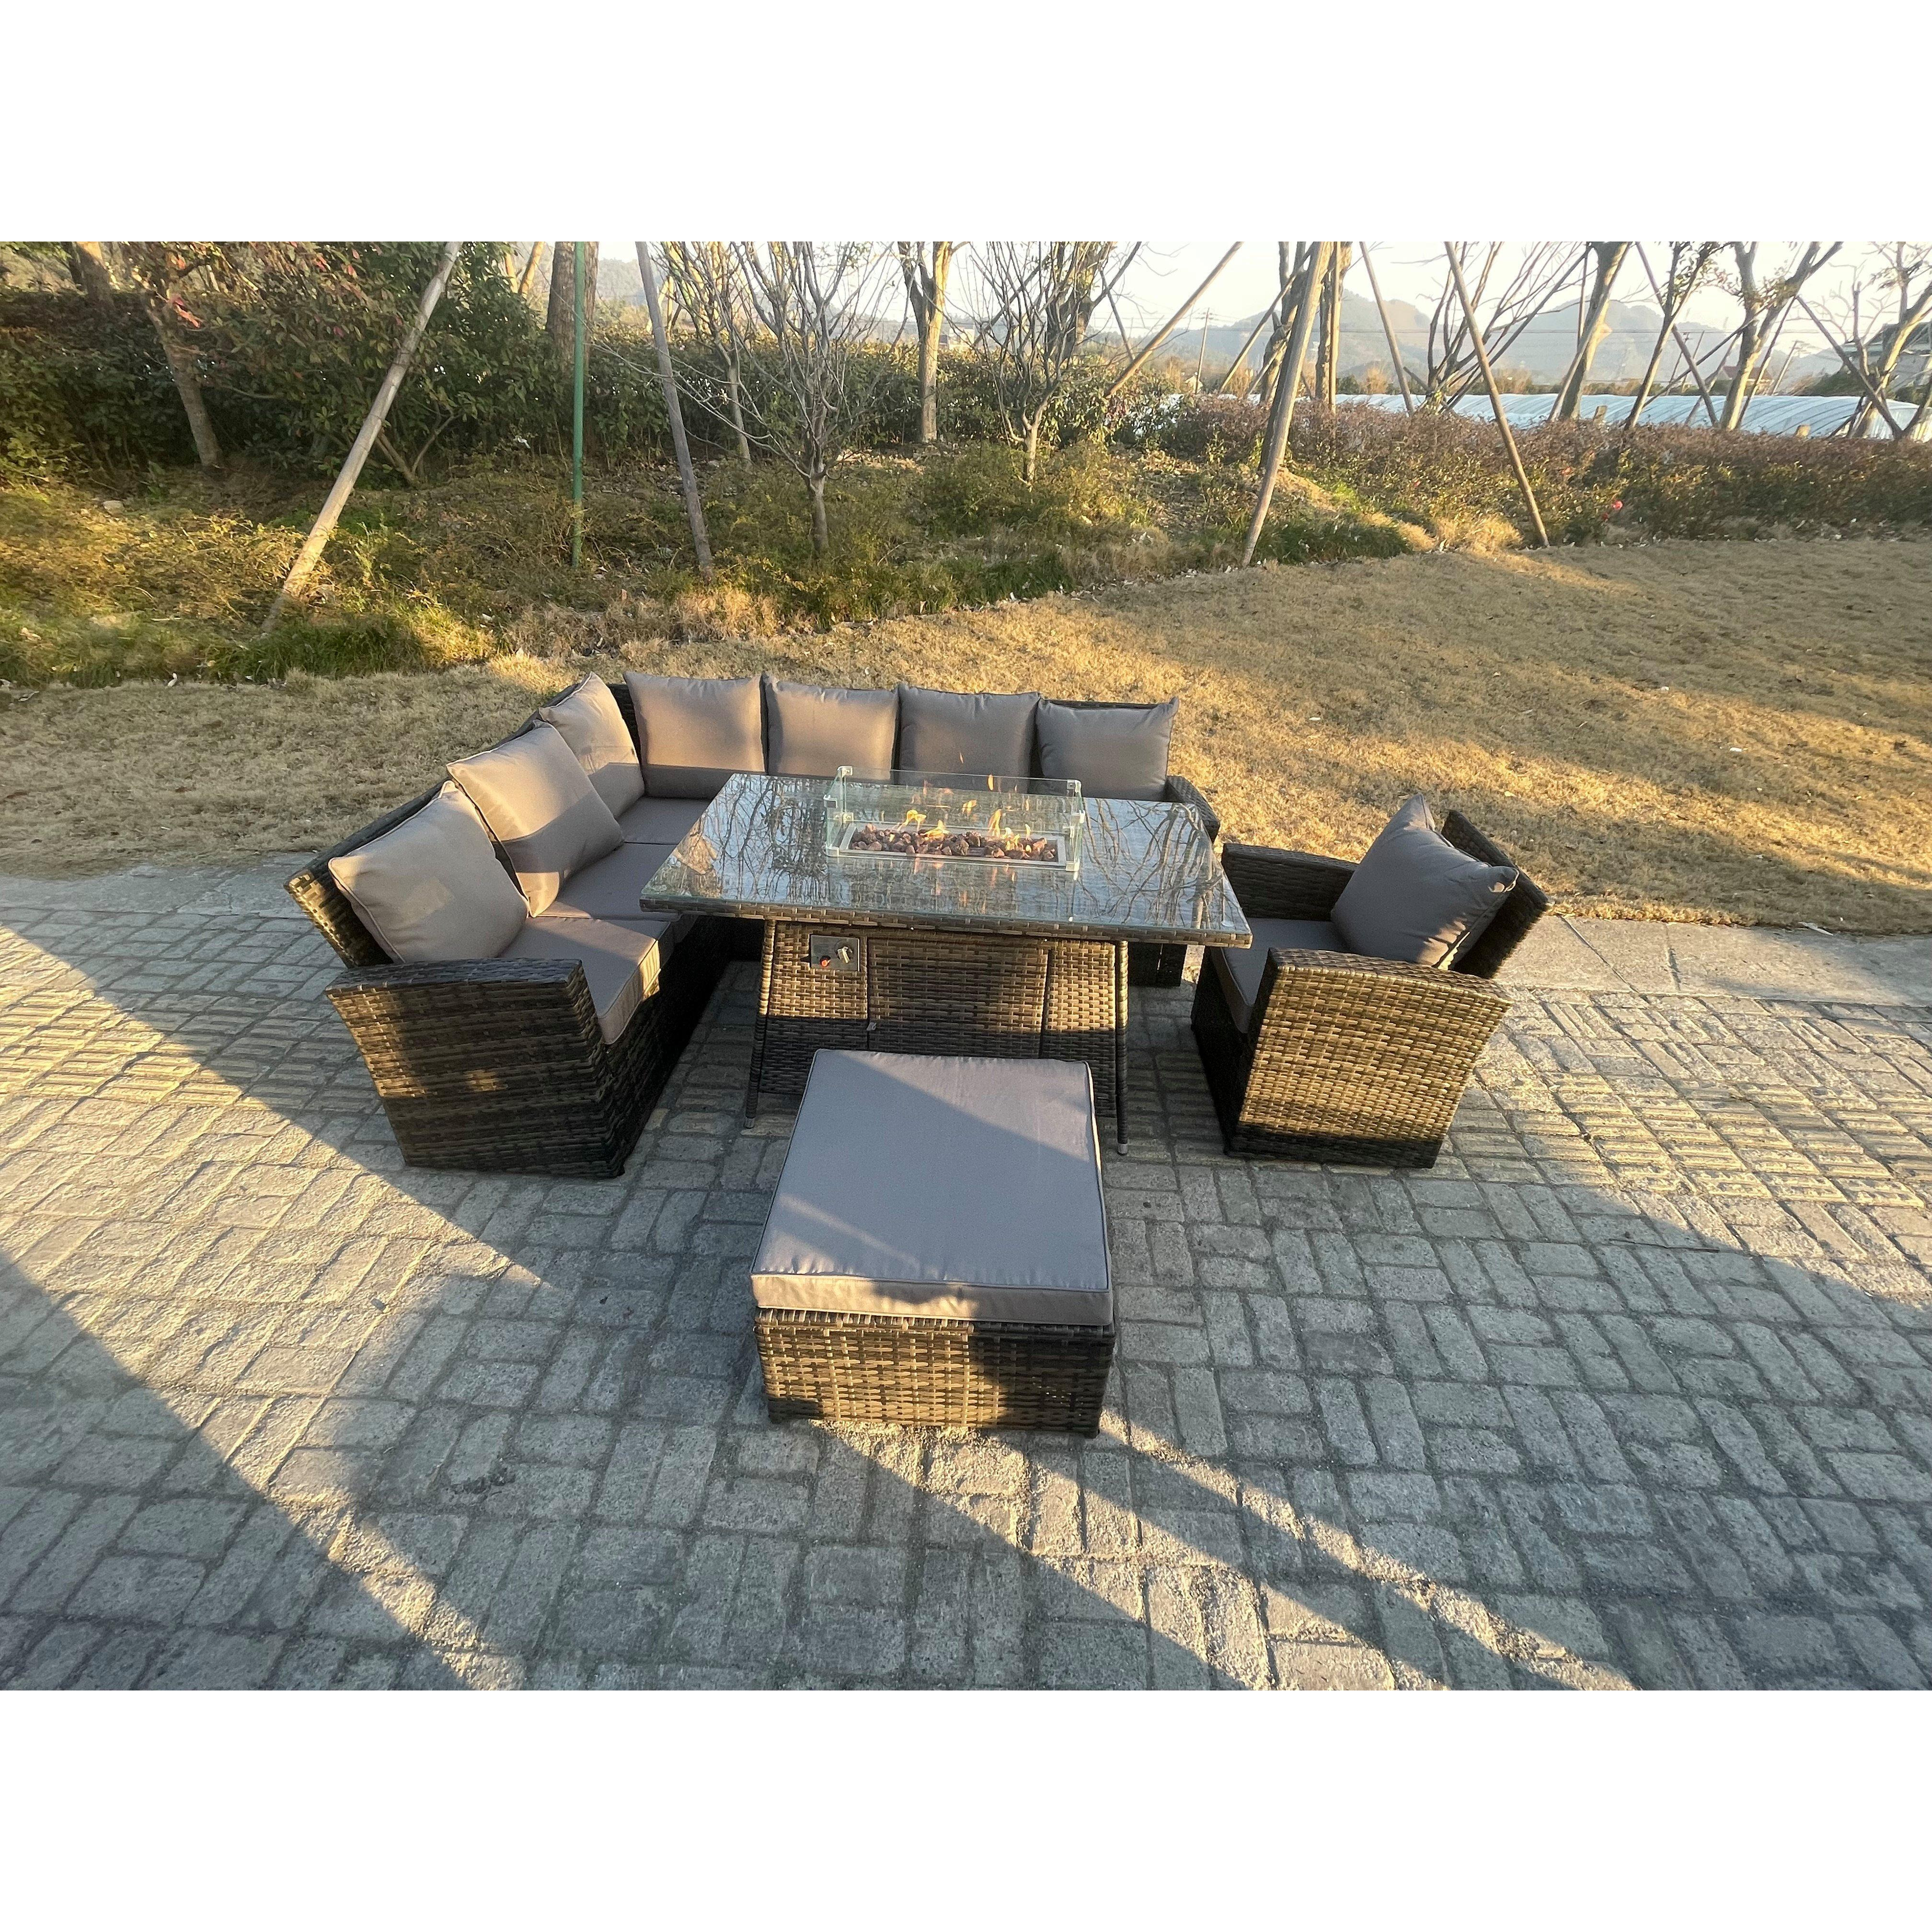 High Back Rattan Garden Furniture Sets Gas Fire Pit Dining Table  Left Corner Sofa Big Footstools Chair 8 Seater - image 1